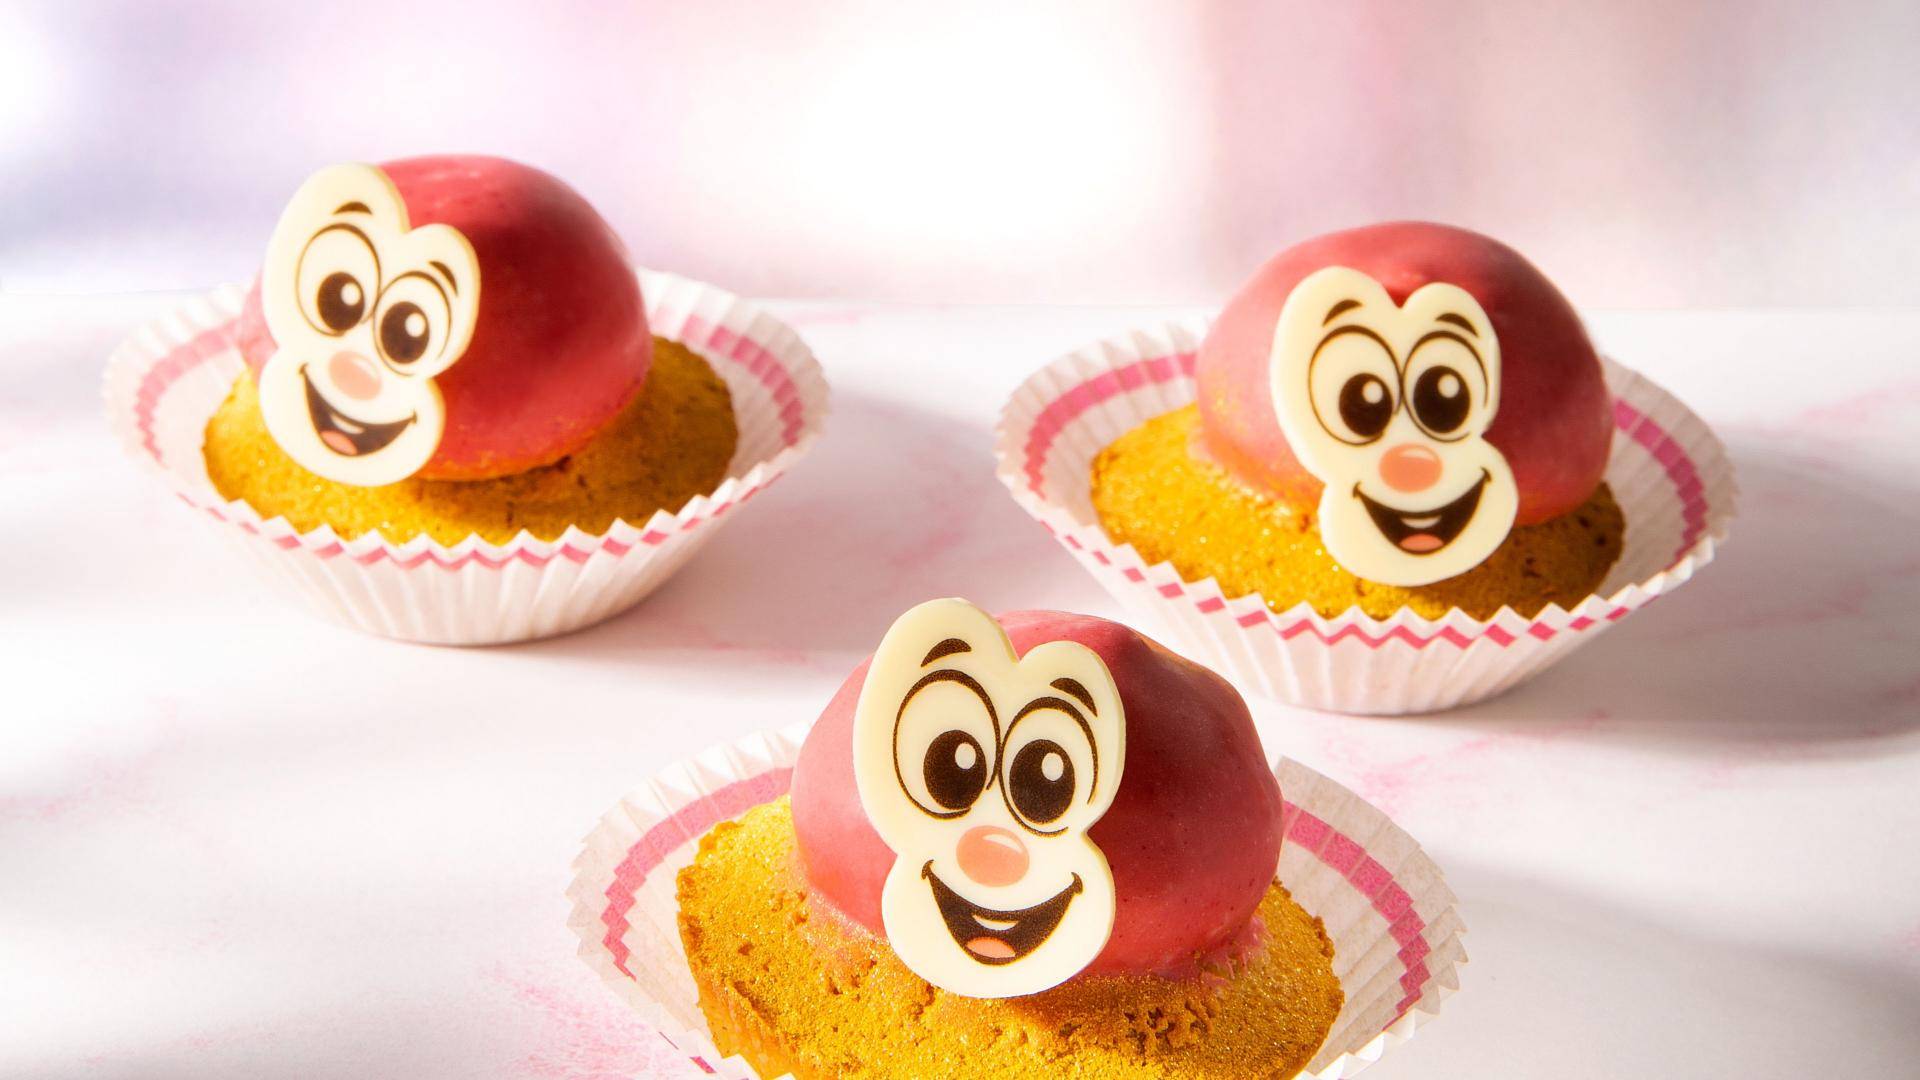 Cupcakes with happy face chocolate decorations